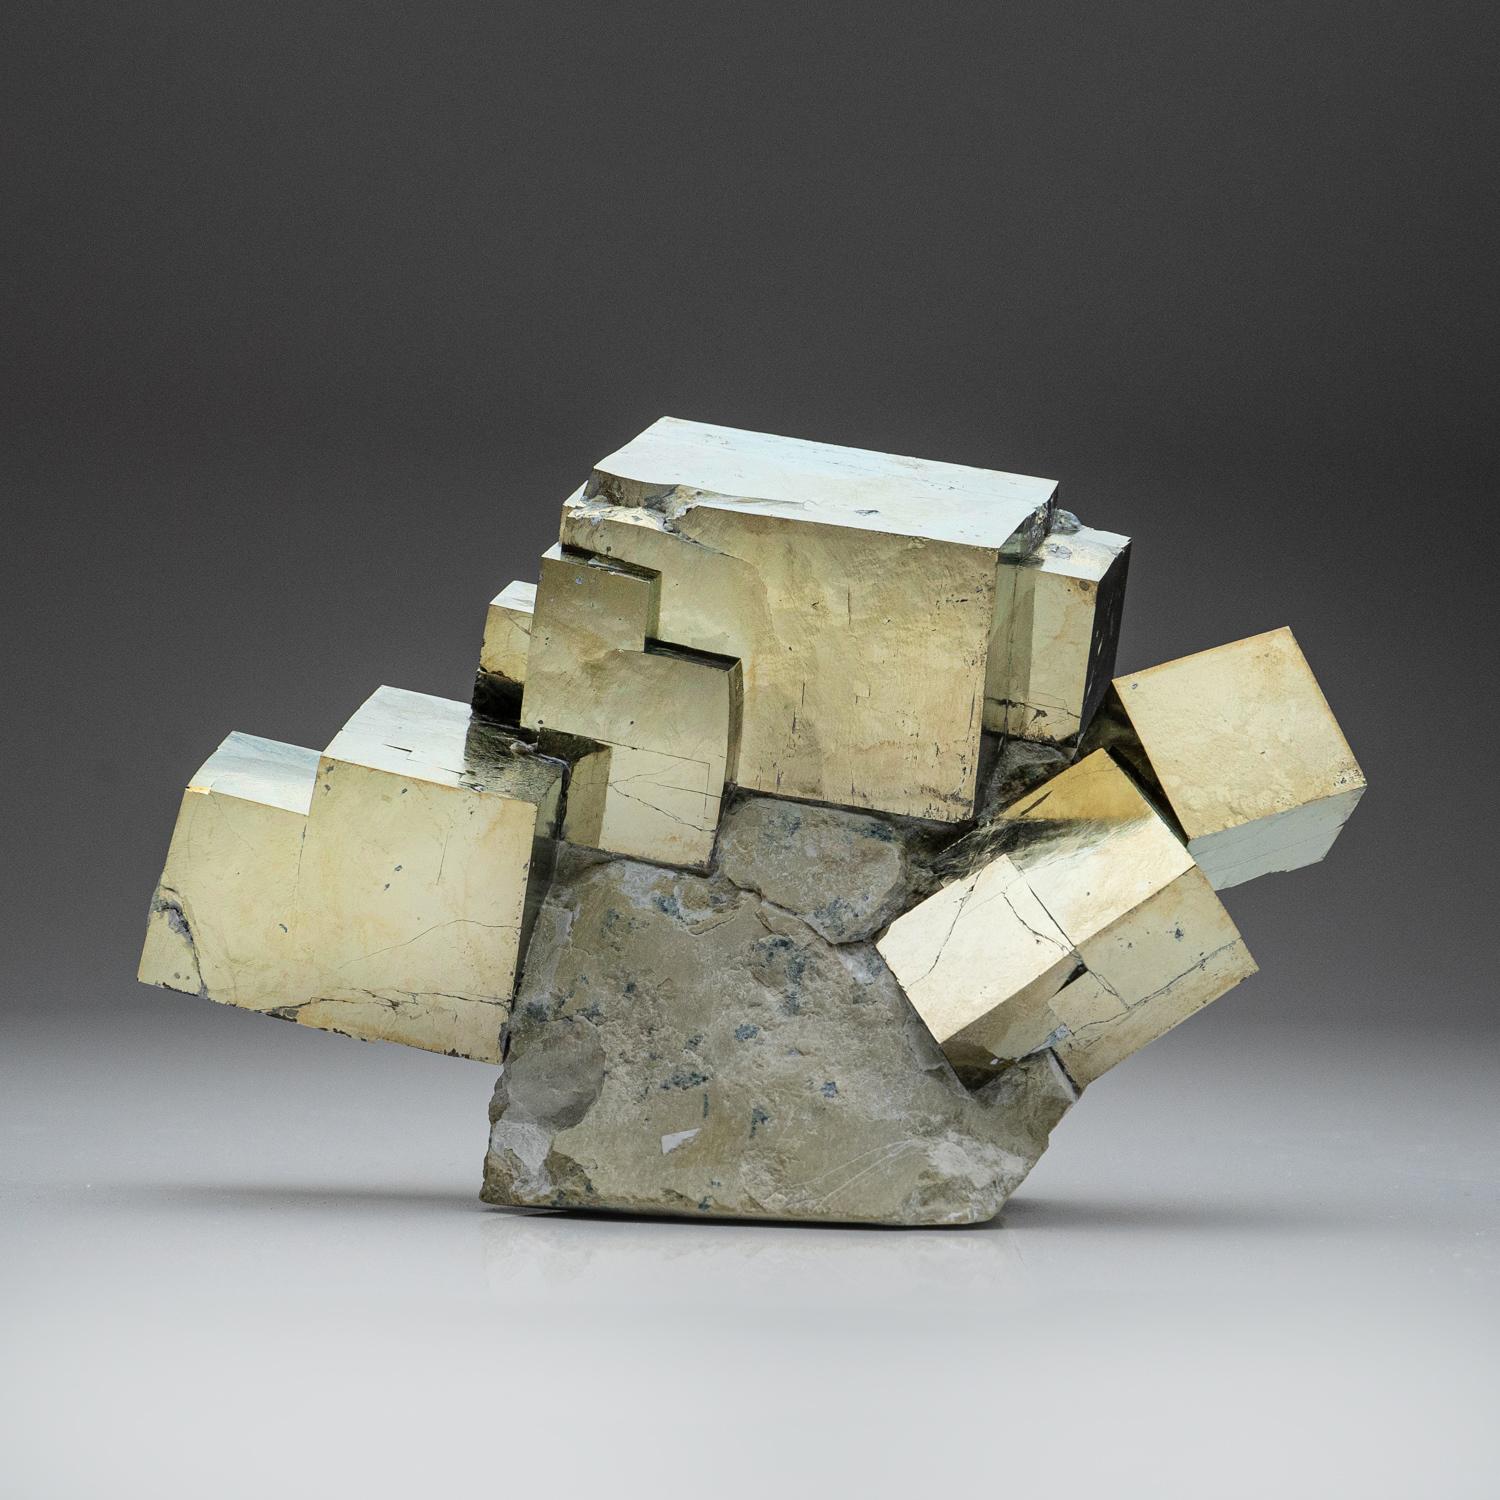 A world-class cluster of perfectly terminated cubic Pyrite crystals, interlocked on it's natural Basalt matrix. This specimen was discovered in the famous mines of Navajun, Spain - considered one of the finest locations in the world for Pyrite. This